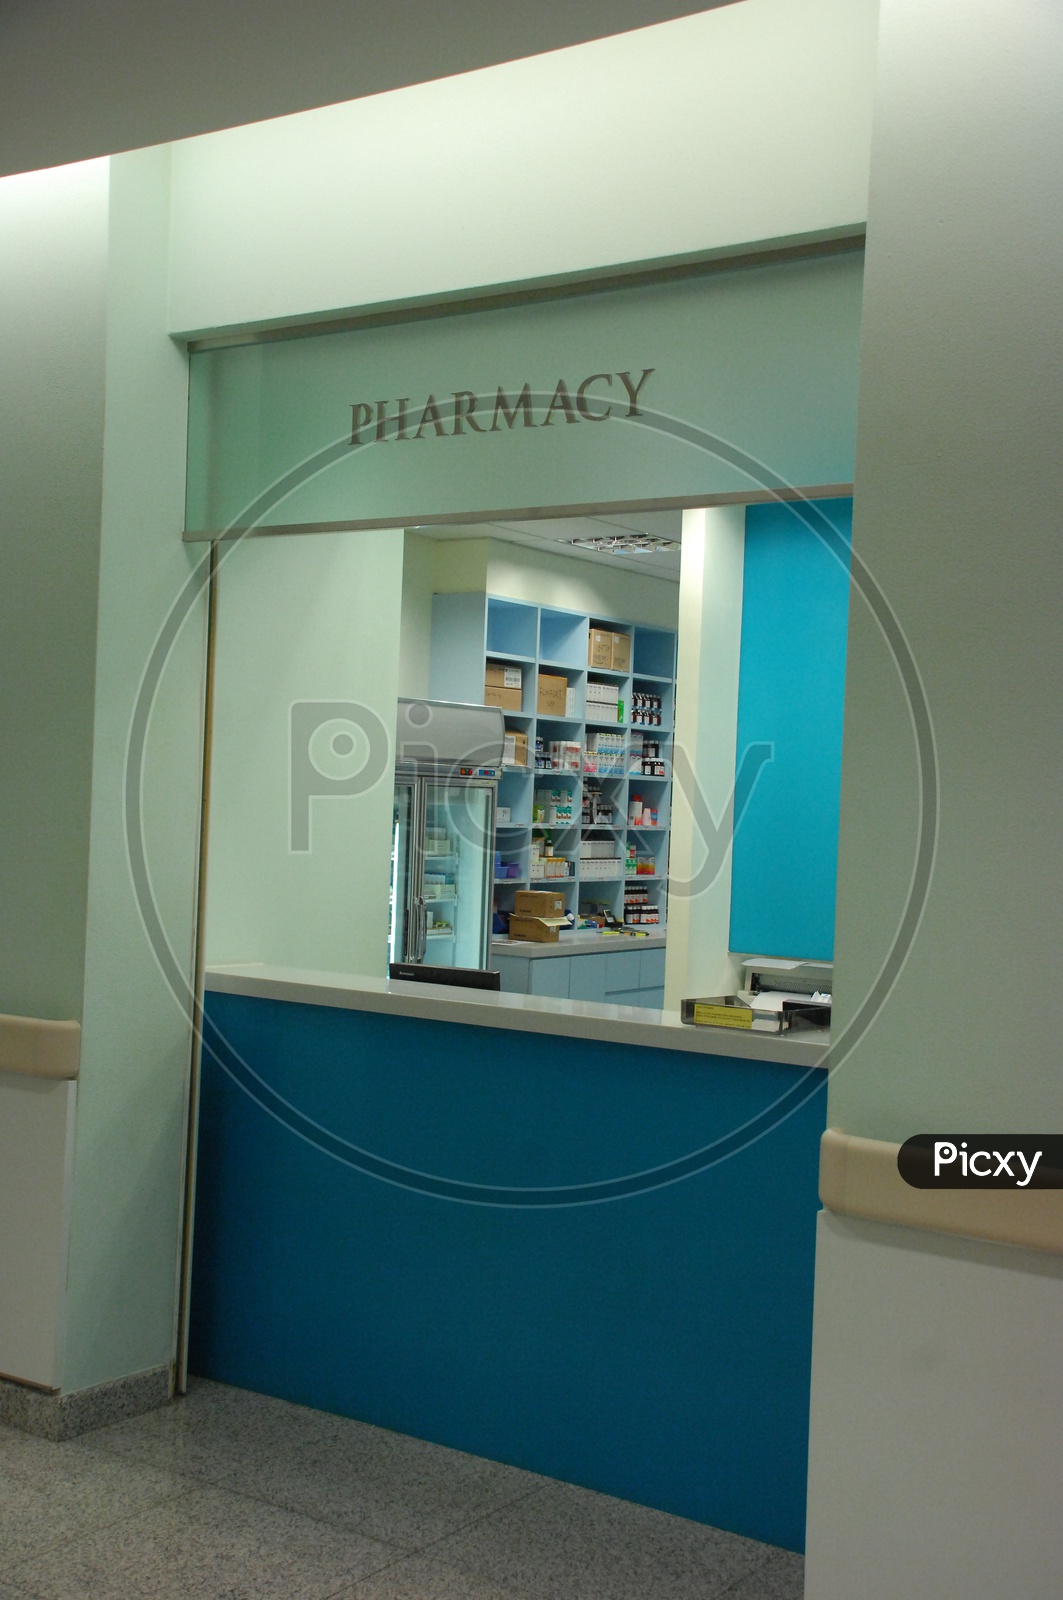 Pharmacy store in a Hospital